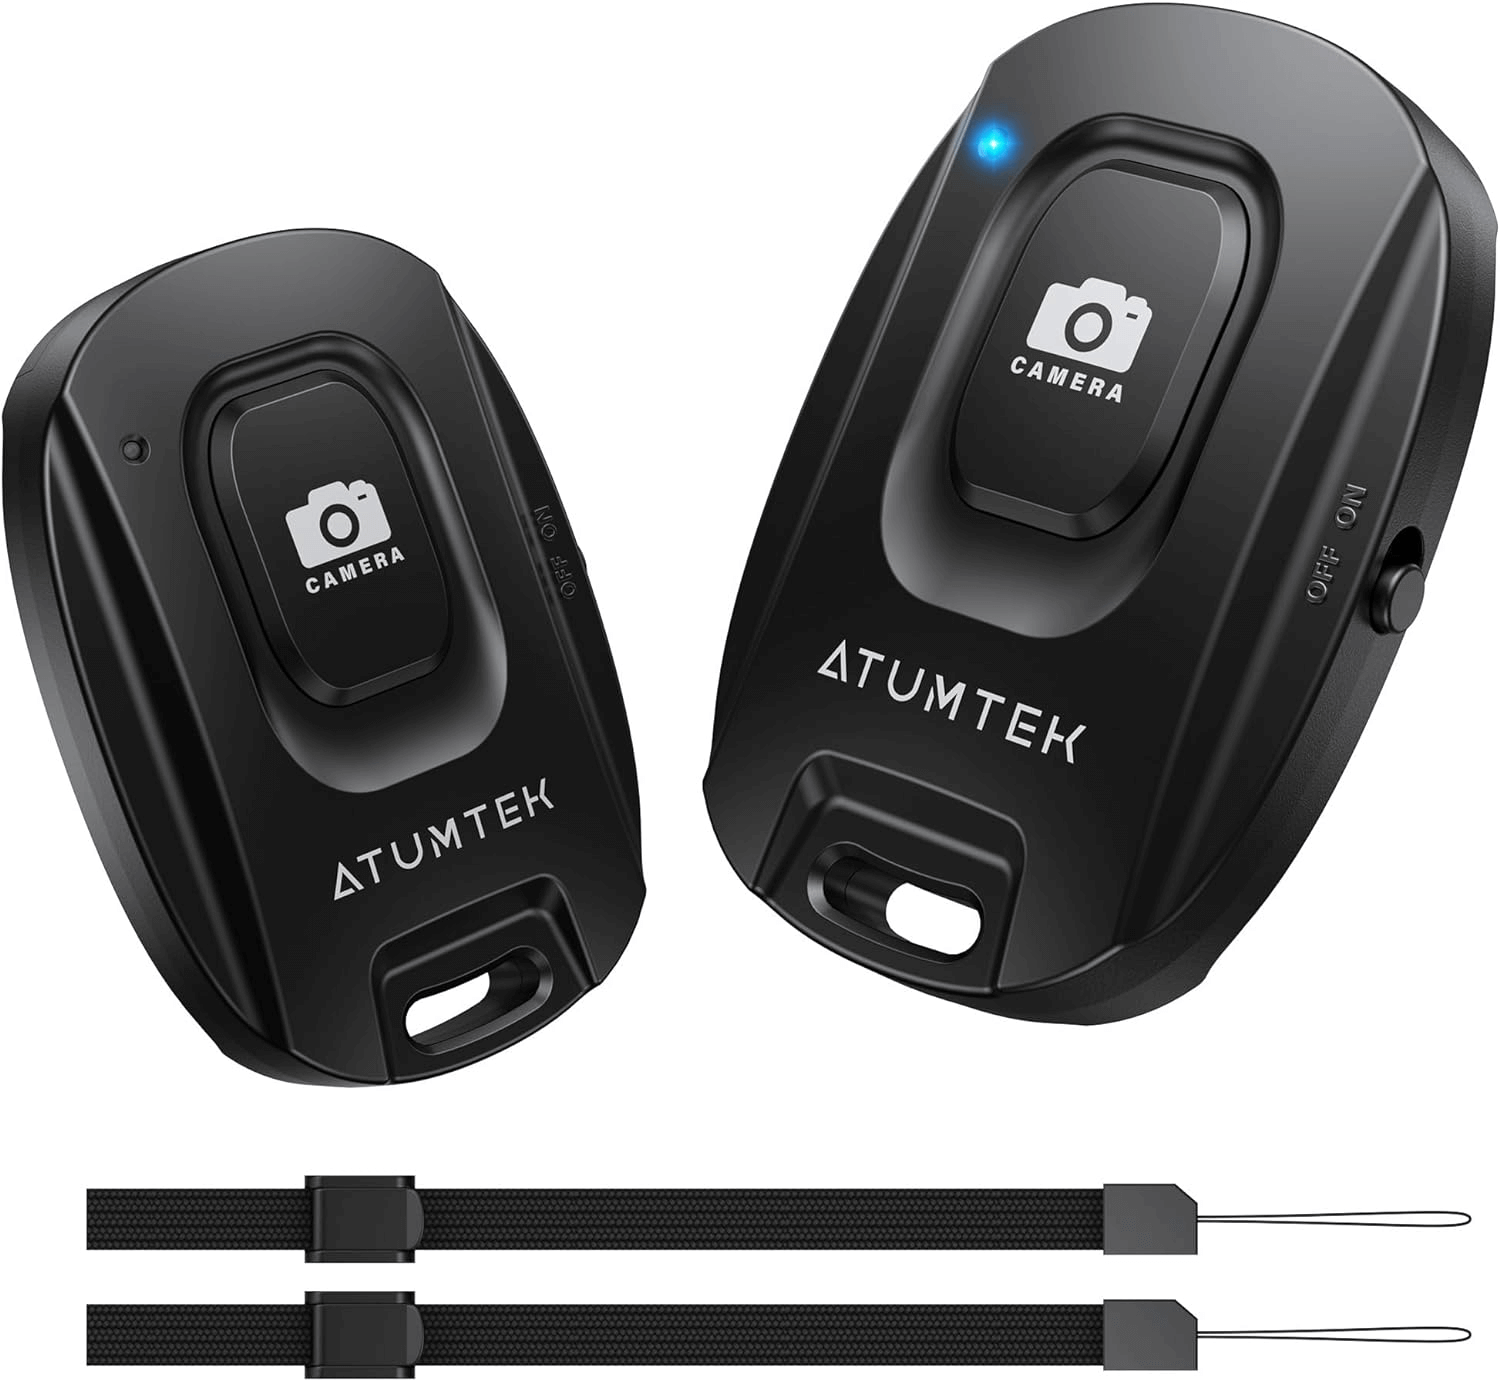 Atumtek-Wireless-Phone-Remote-Control-Selfie-Button-for-Photos-and-Videos